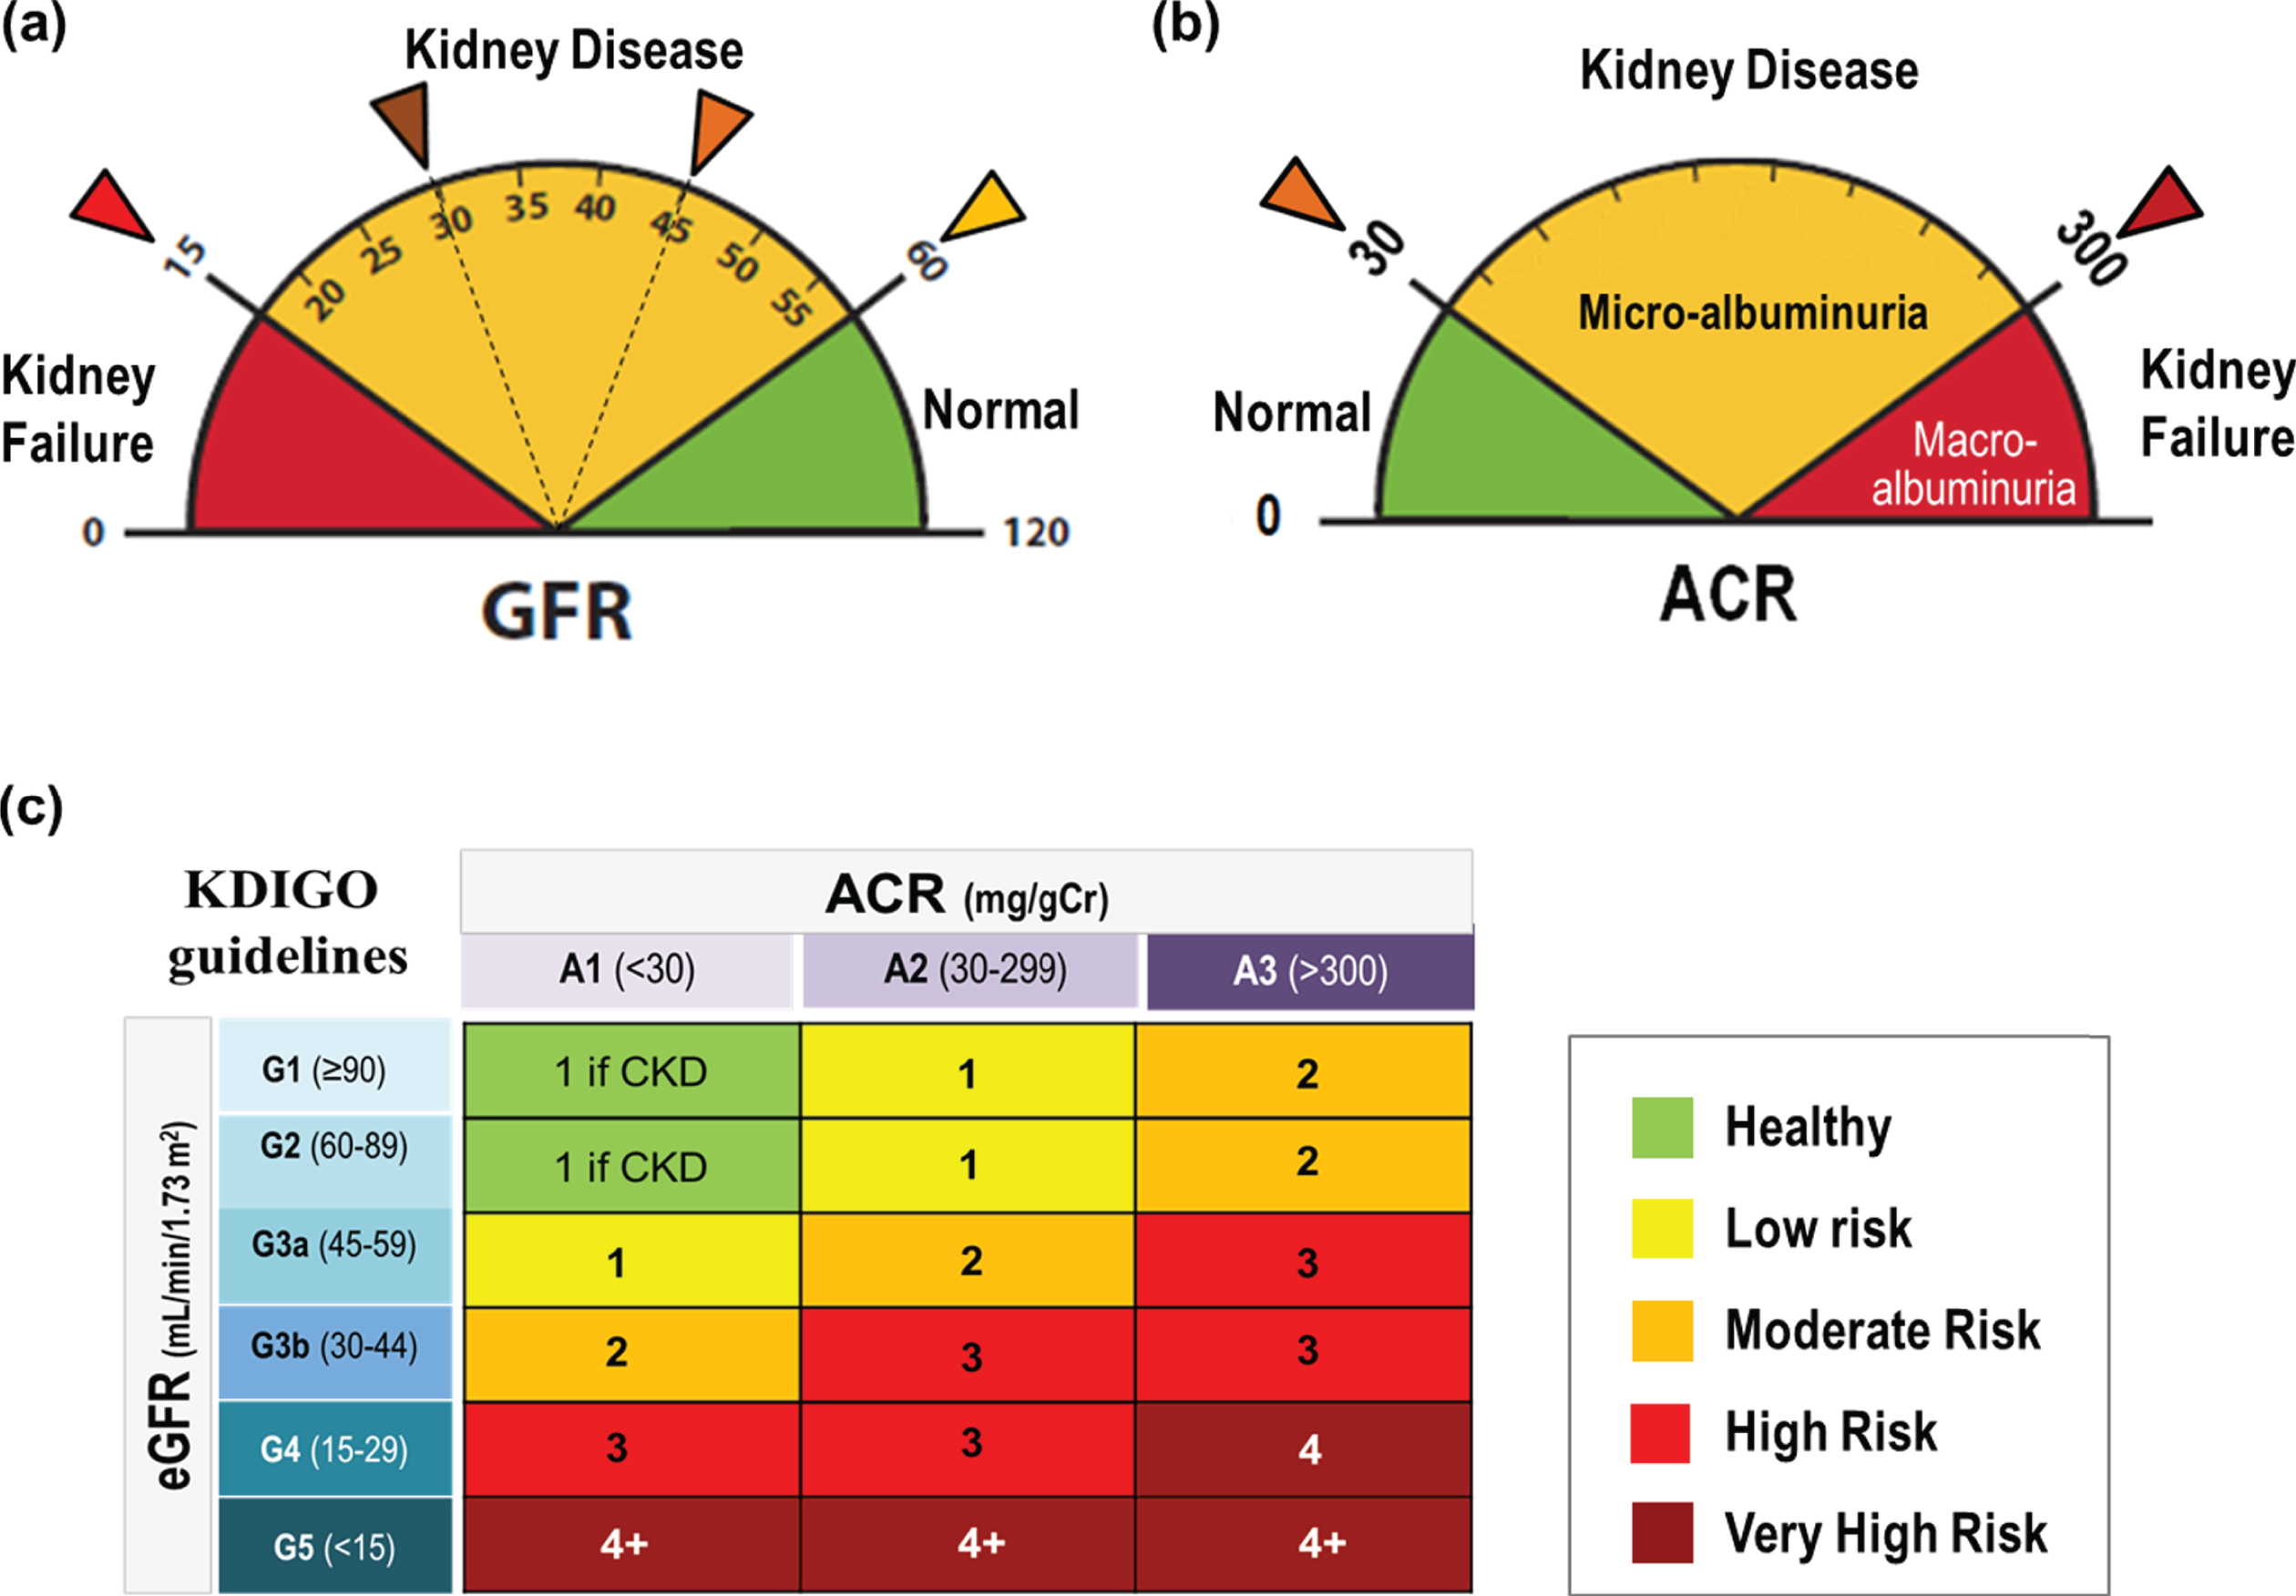 Classification of CKD using (a) GFR and (b) albuminuria, (c) Classification of CKD using GFR and ACR categories: KDIGO guidelines with a categorical risk analysis (cited from Ref. [9]).